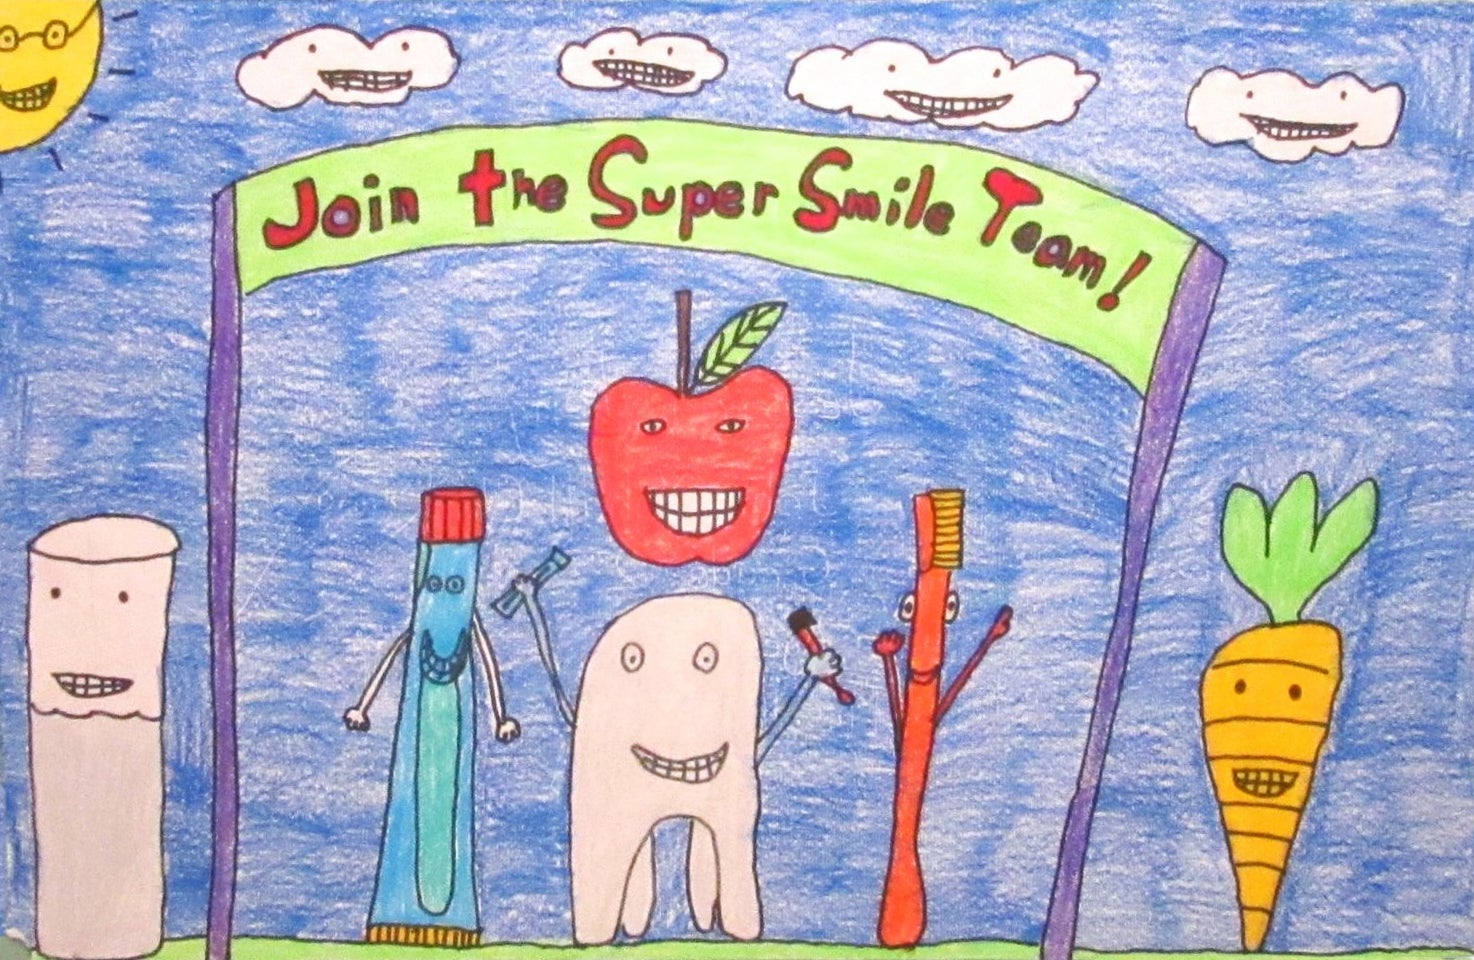 Join the Super Smile Team at SFO